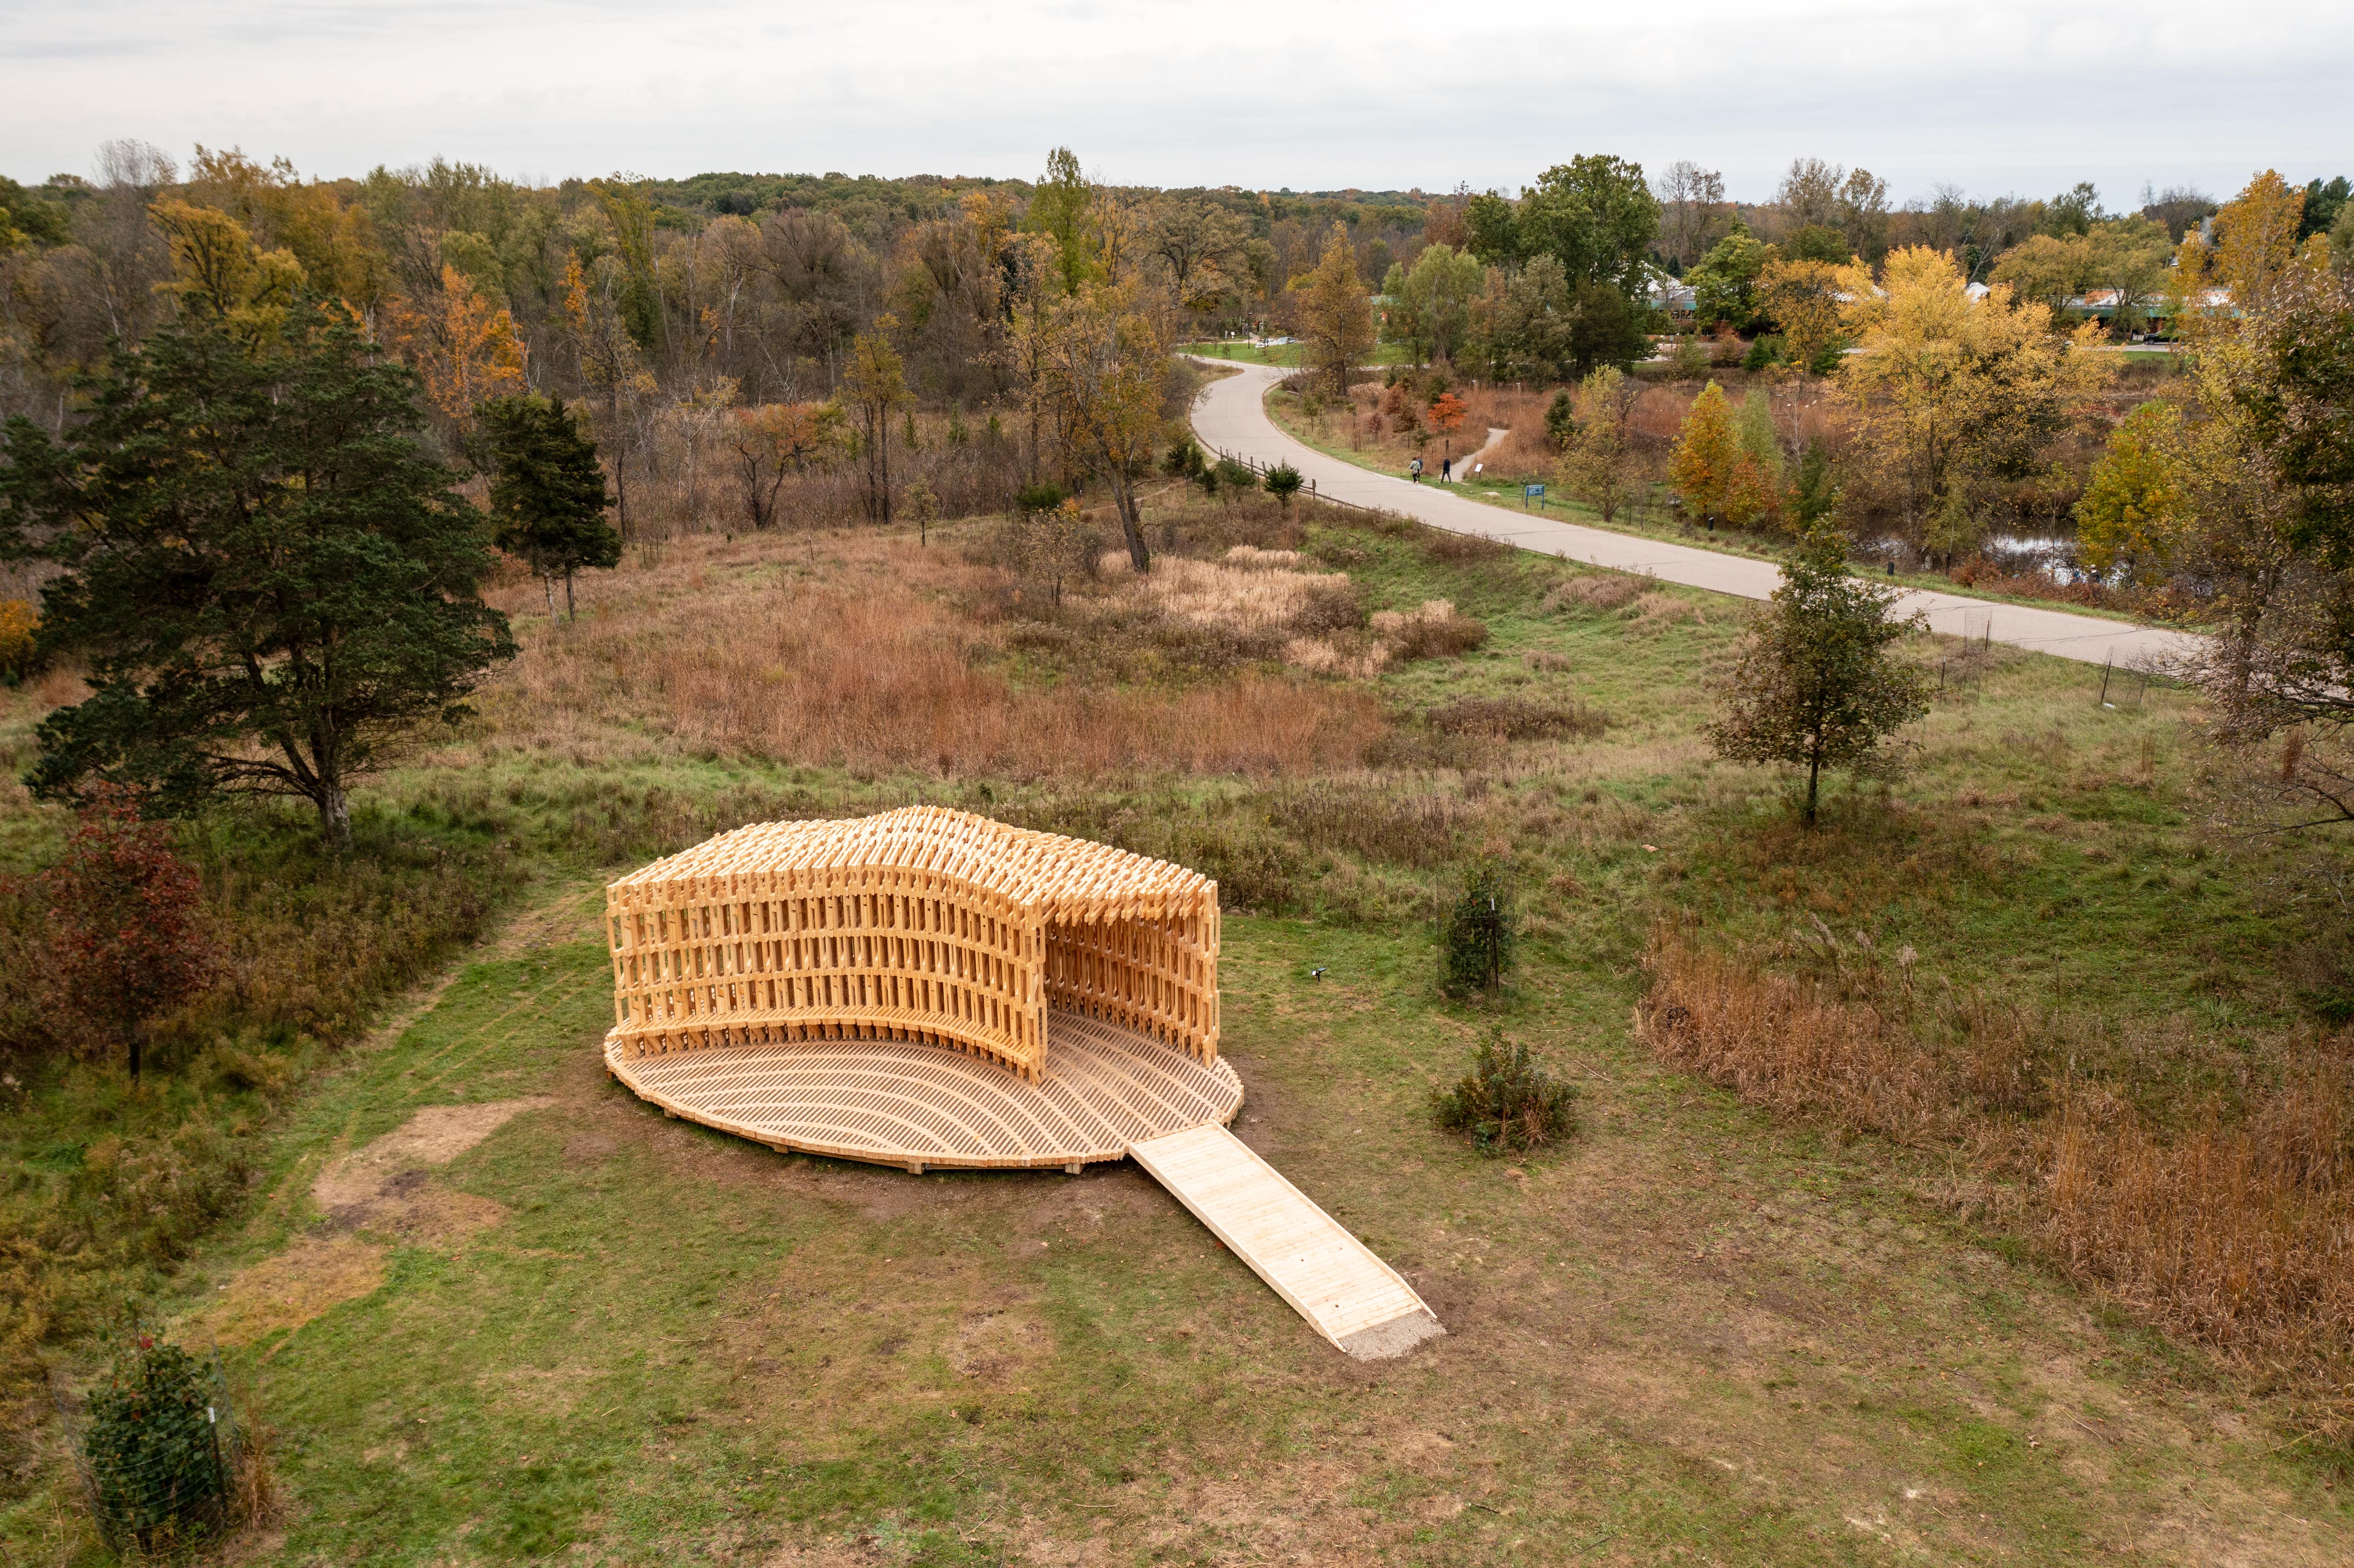 Exploration of Robotic Technology in Designing Complex Wooden Pavilions